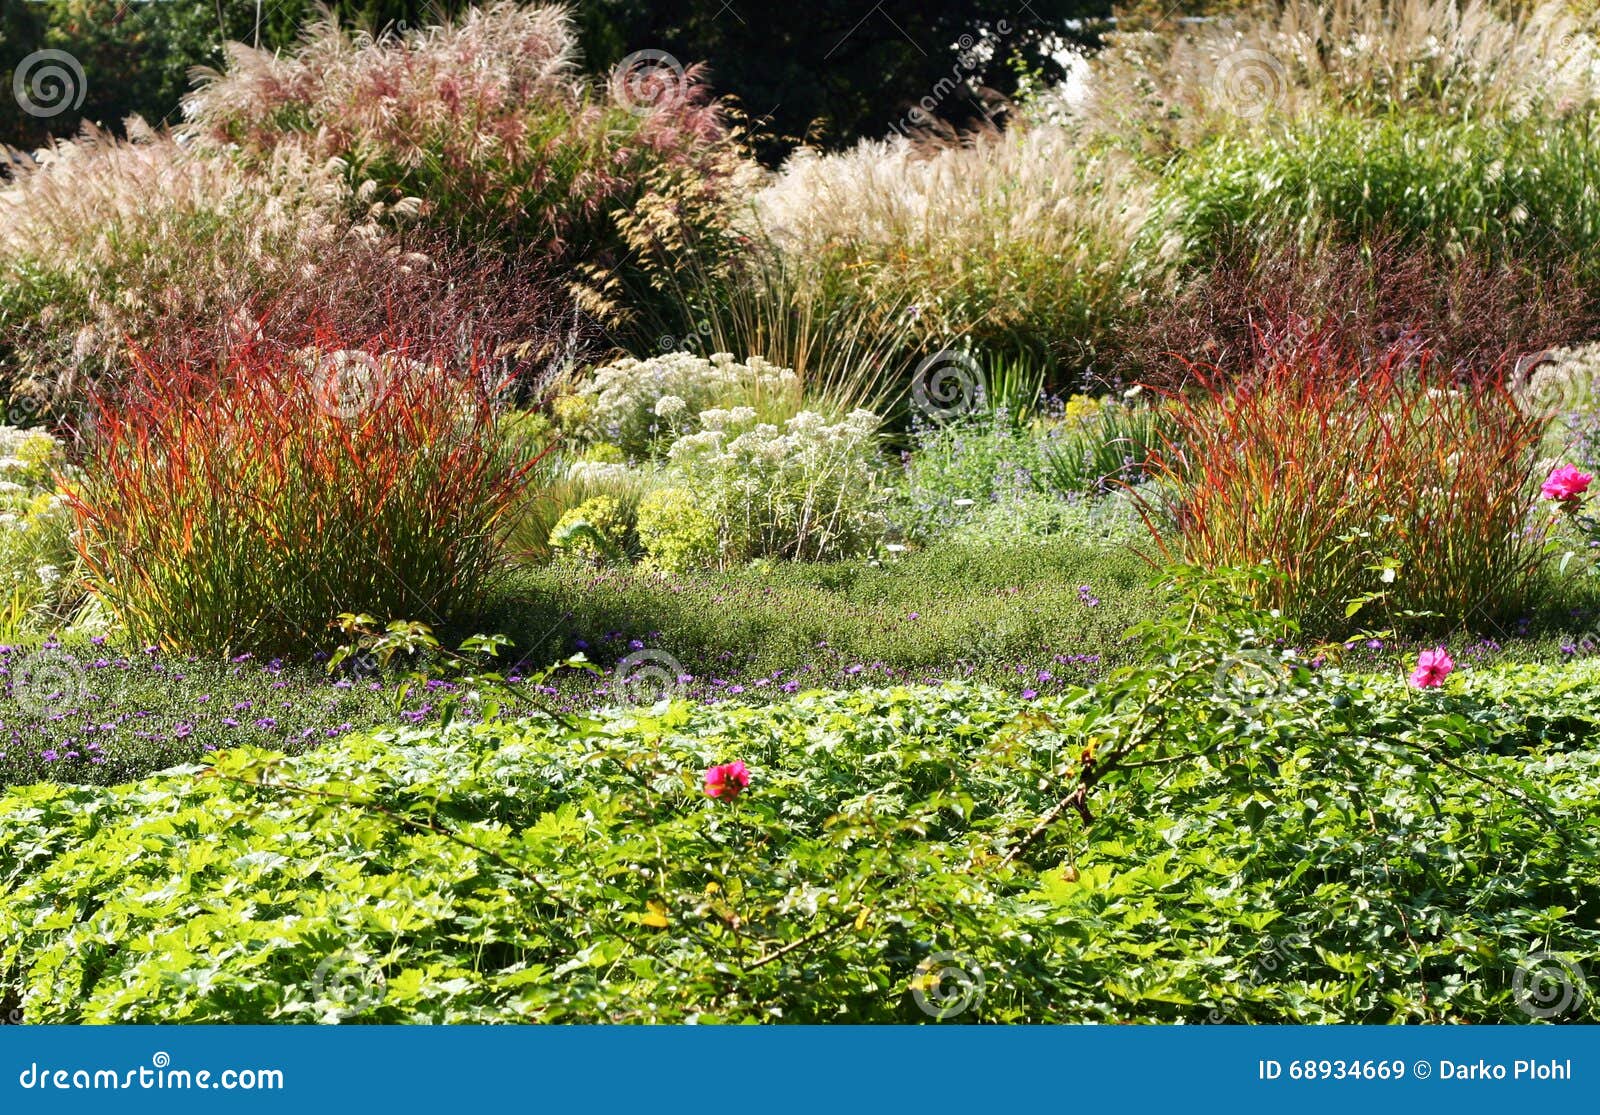 garden beds with perennials and ornamental grasses